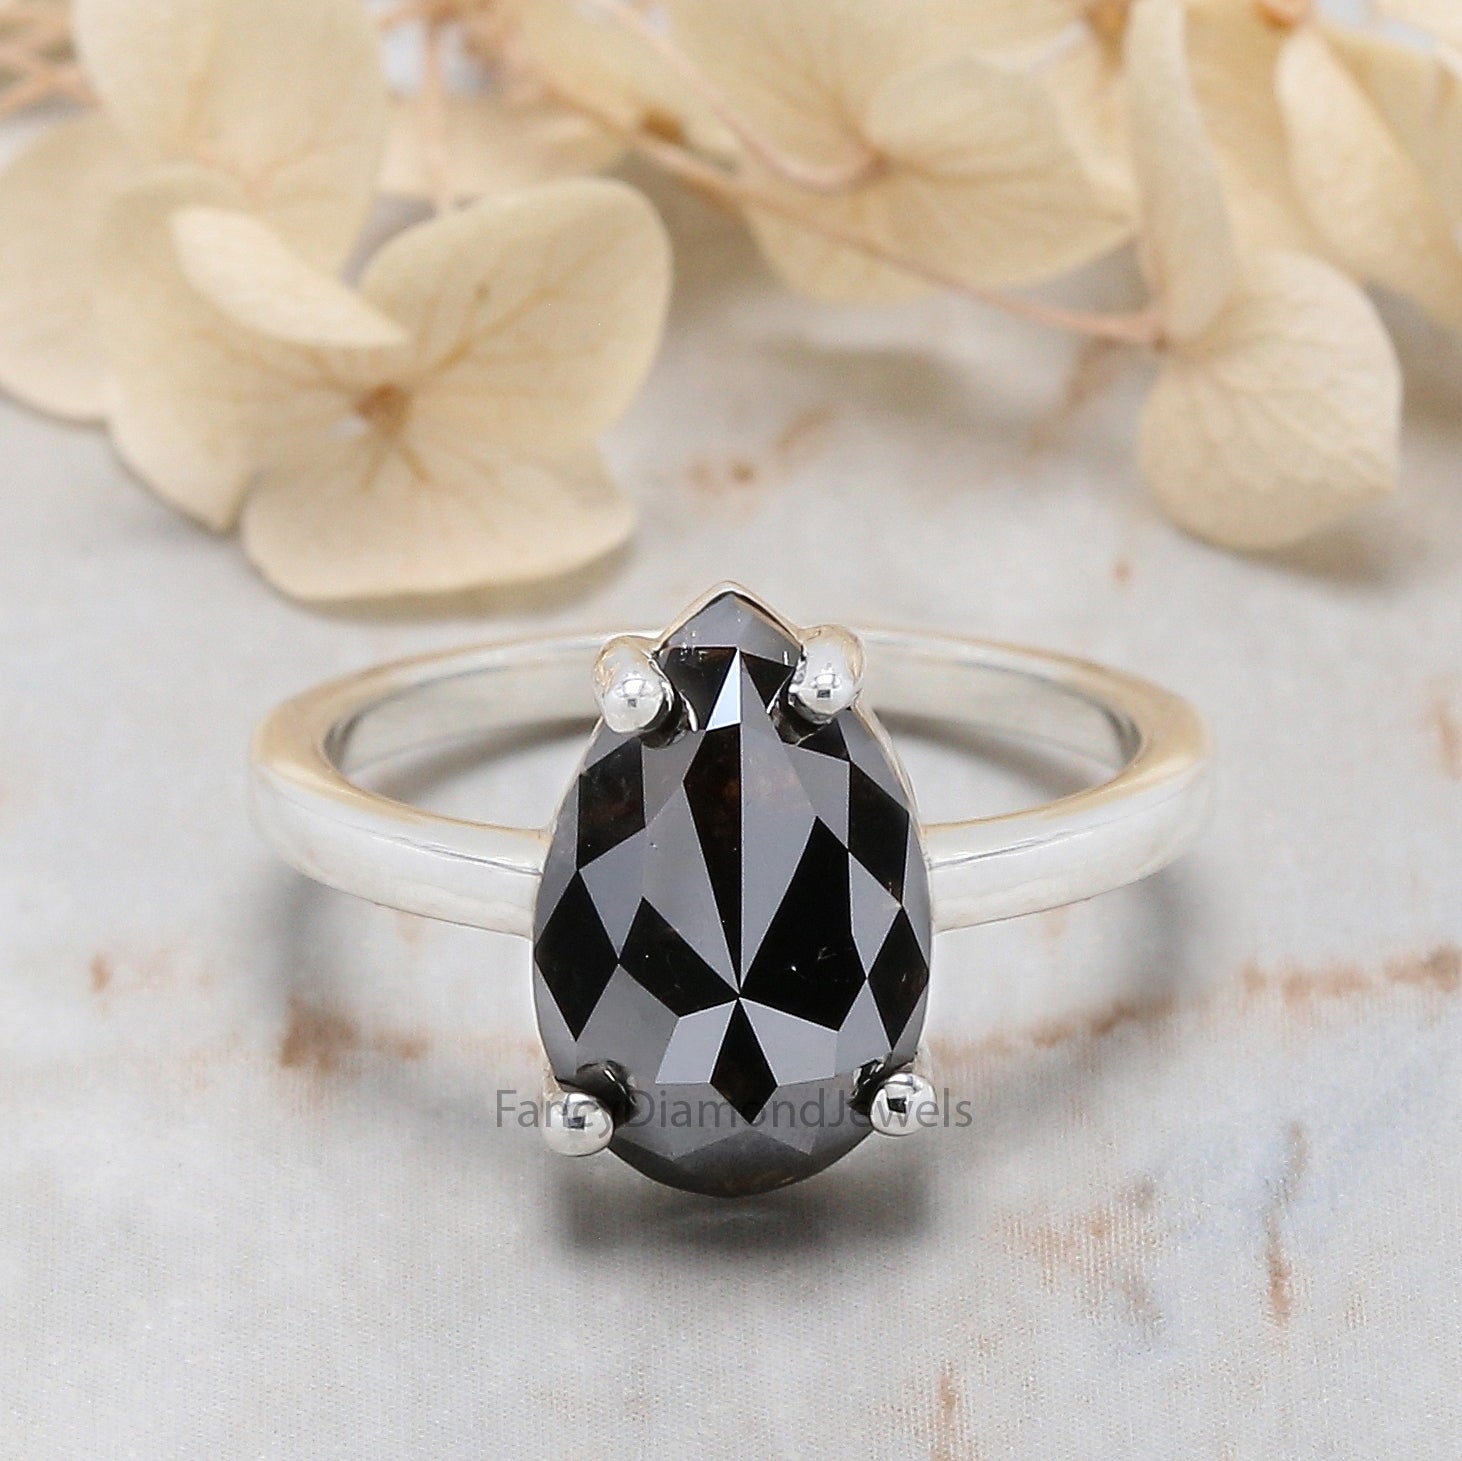 Pear Diamond Ring, Pear Engagement Ring, Black Color Pear Diamond Ring, Pear Shape Diamond Ring, Pear Solitaire Ring, Pear Cut Ring, QL2155